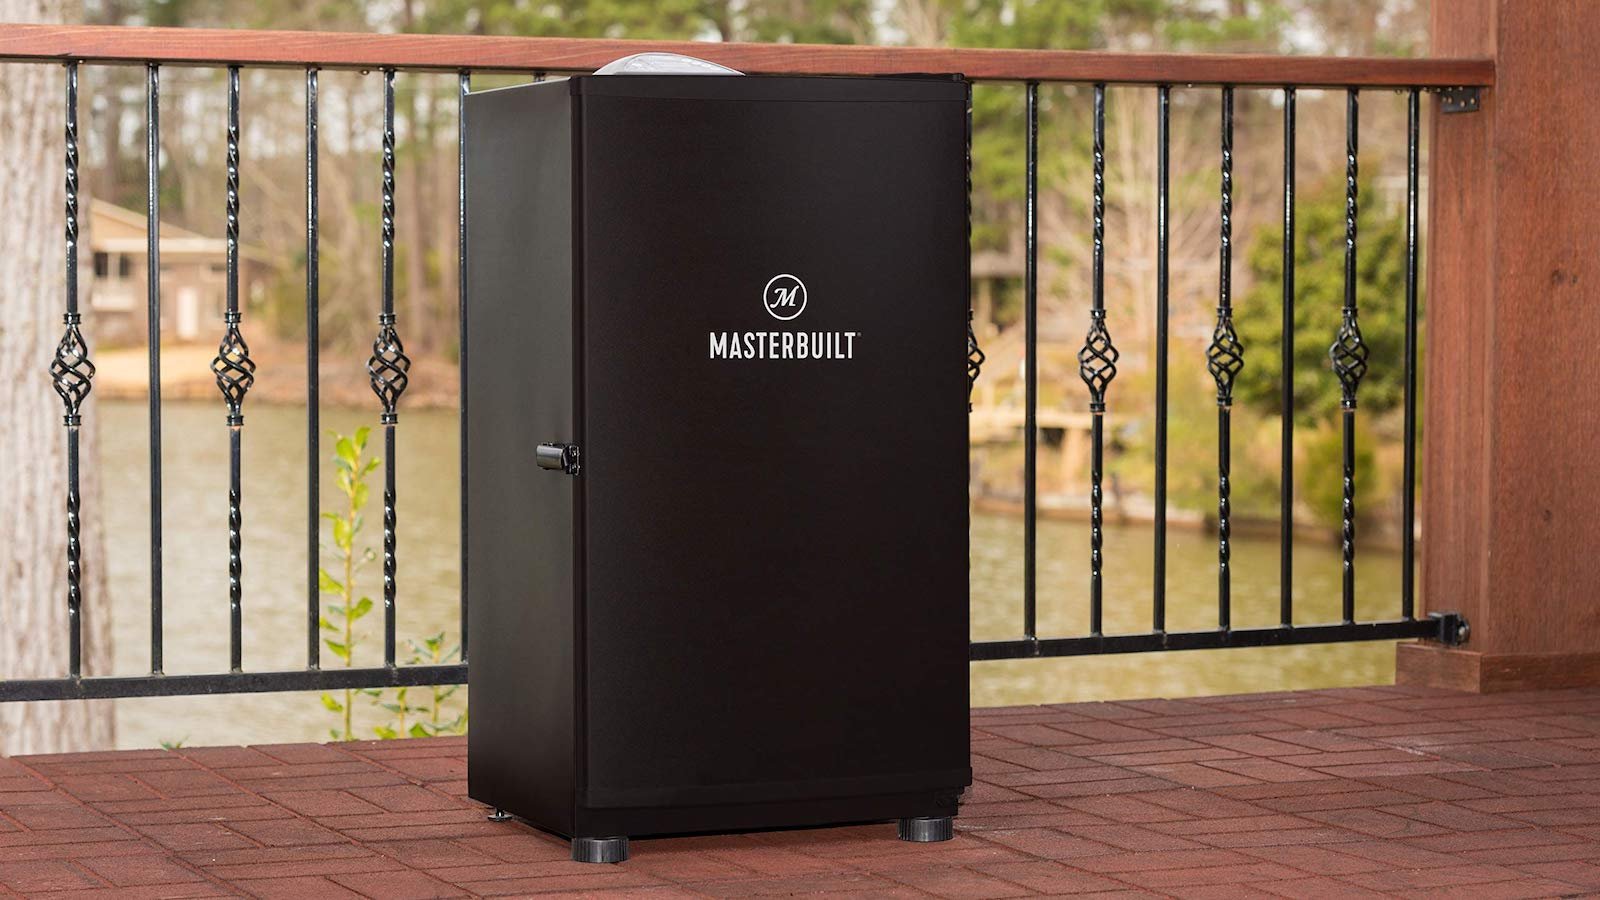 Masterbuilt 30″ Digital Electric Smoker reaches 275˚F and has 711 sq. in. of smoking space